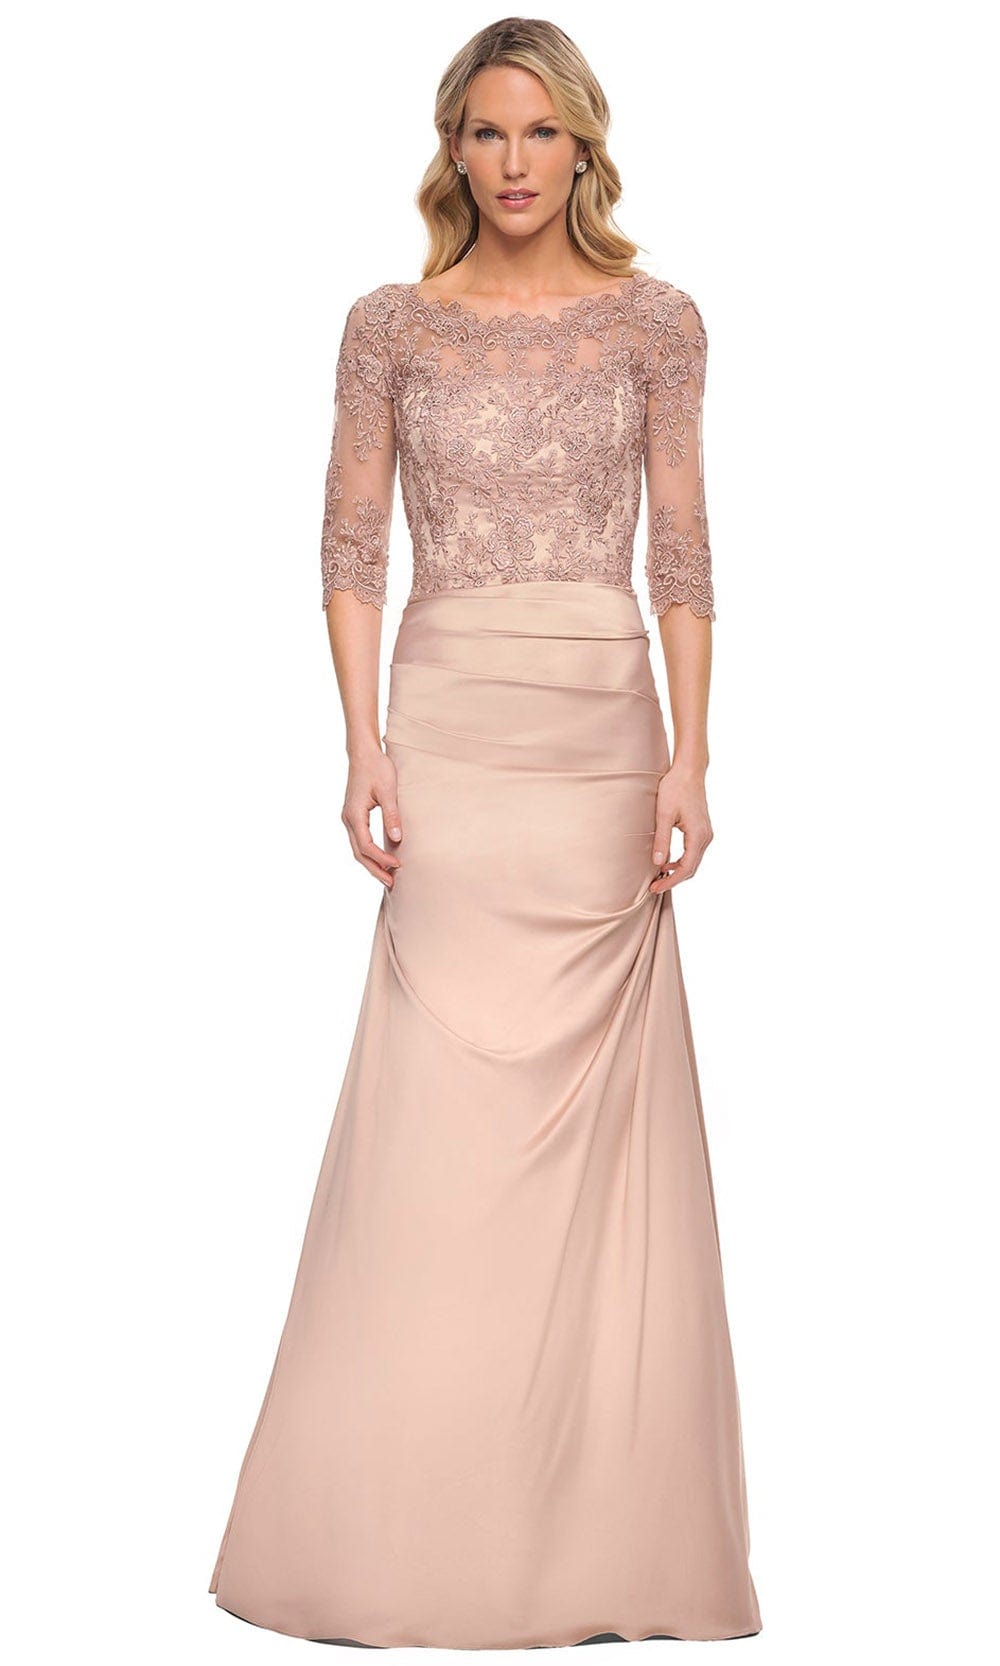 Image of La Femme 30162 - Lace And Satin Sheer Gown